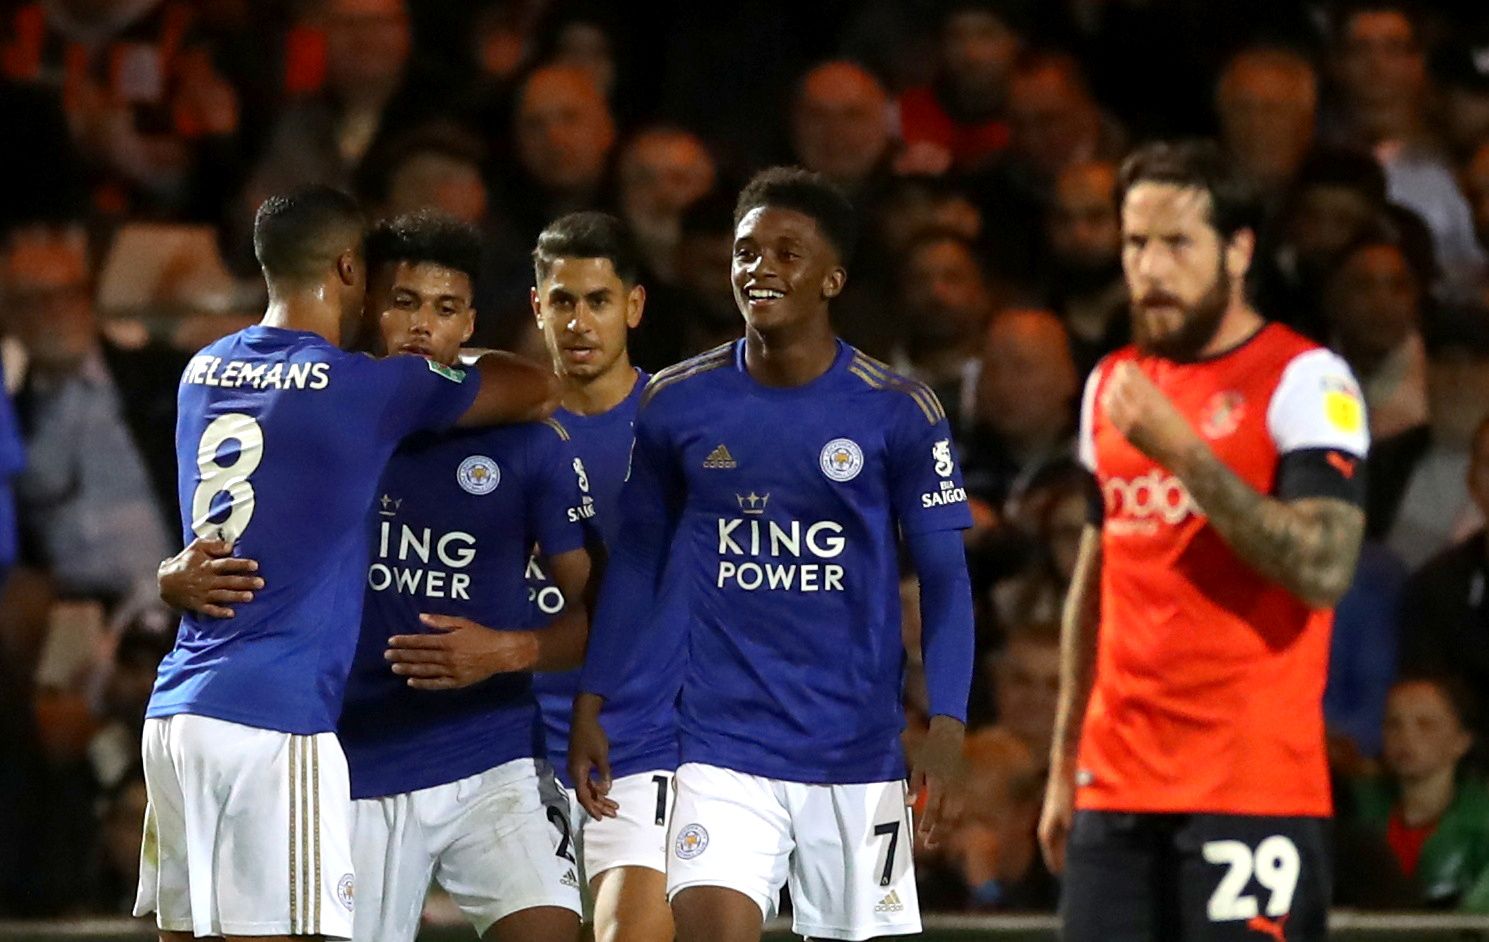 Soccer Football - Carabao Cup - Third Round - Luton Town v Leicester City - Kenilworth Road, Luton, Britain - September 24, 2019  Leicester City's James Justin celebrates scoring their second goal with teammates  Action Images via Reuters/Carl Recine  EDITORIAL USE ONLY. No use with unauthorized audio, video, data, fixture lists, club/league logos or 